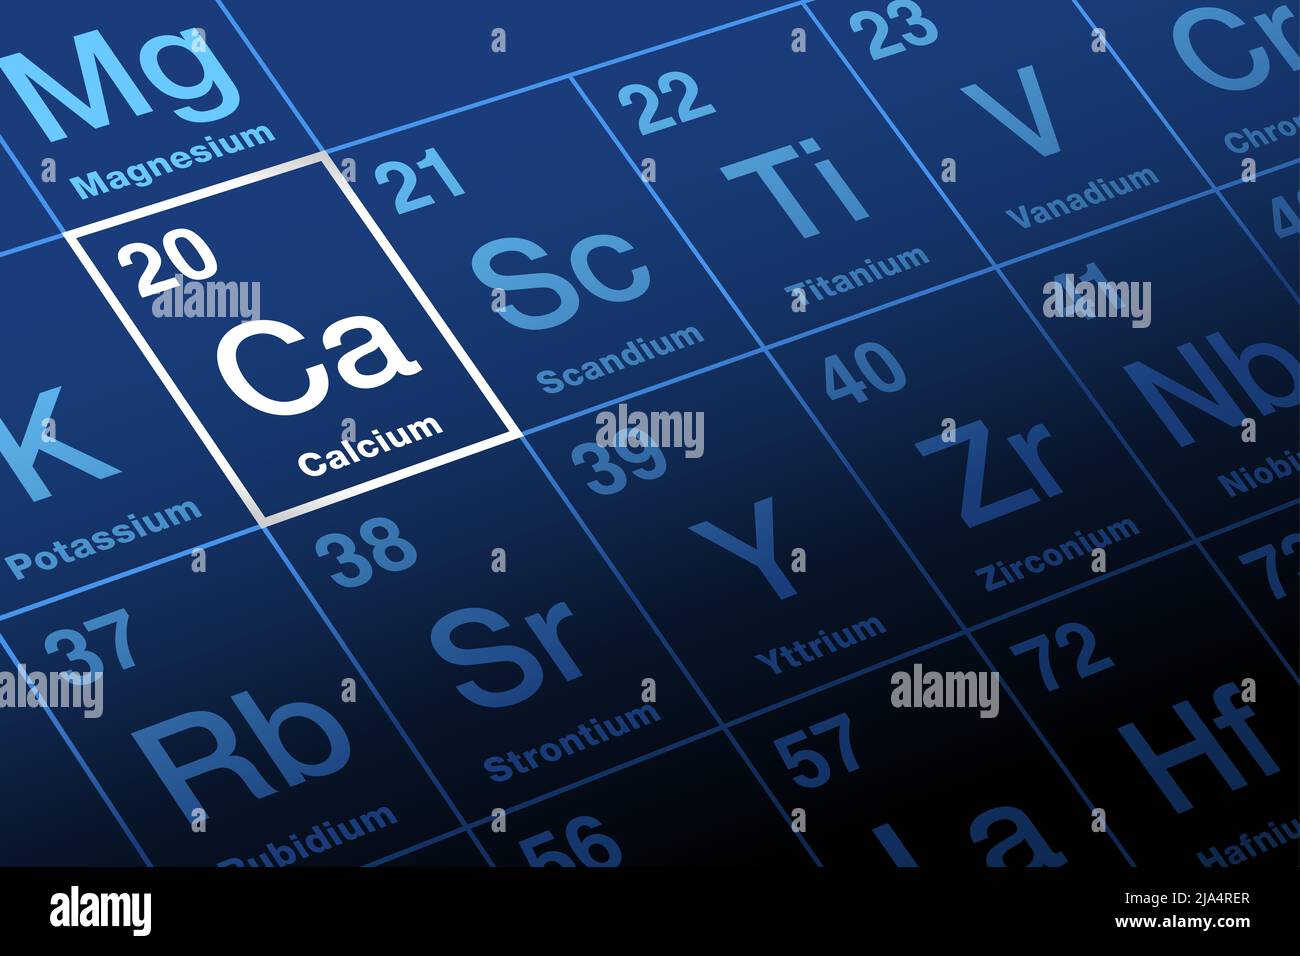 Calcium on periodic table of the elements. Alkaline earth metal, with symbol Ca and atomic number 20. Stock Photo